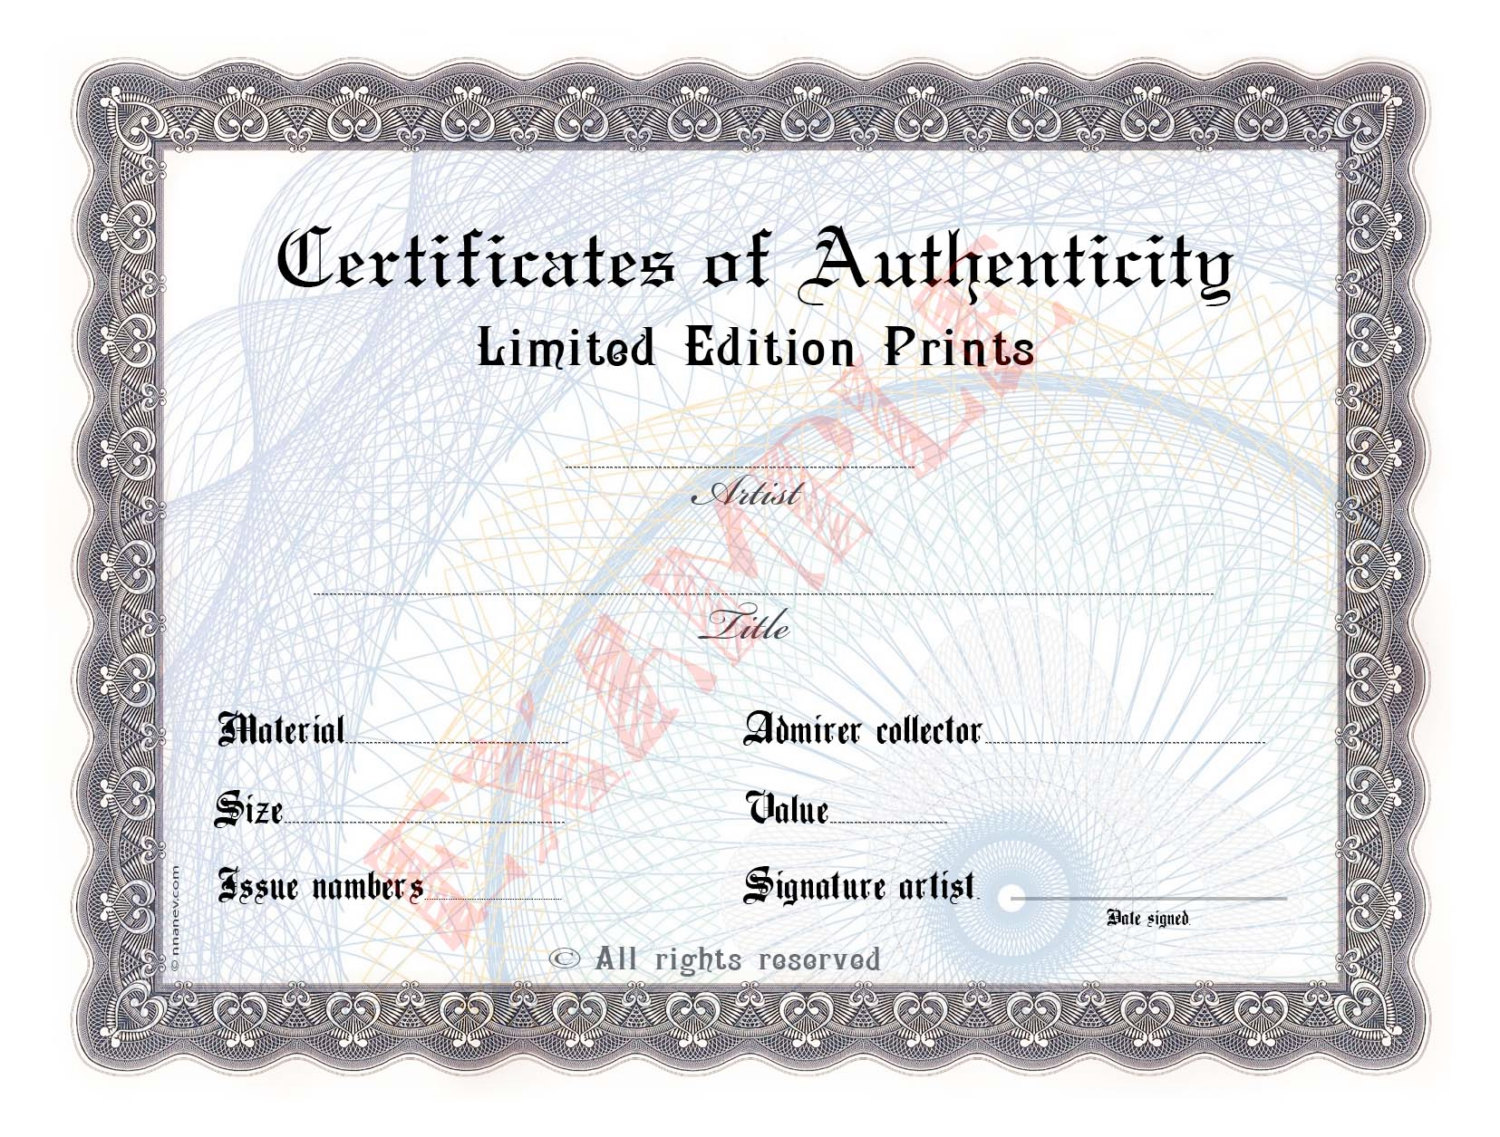 Blank Certificate of Authenticity for Artists Collectors